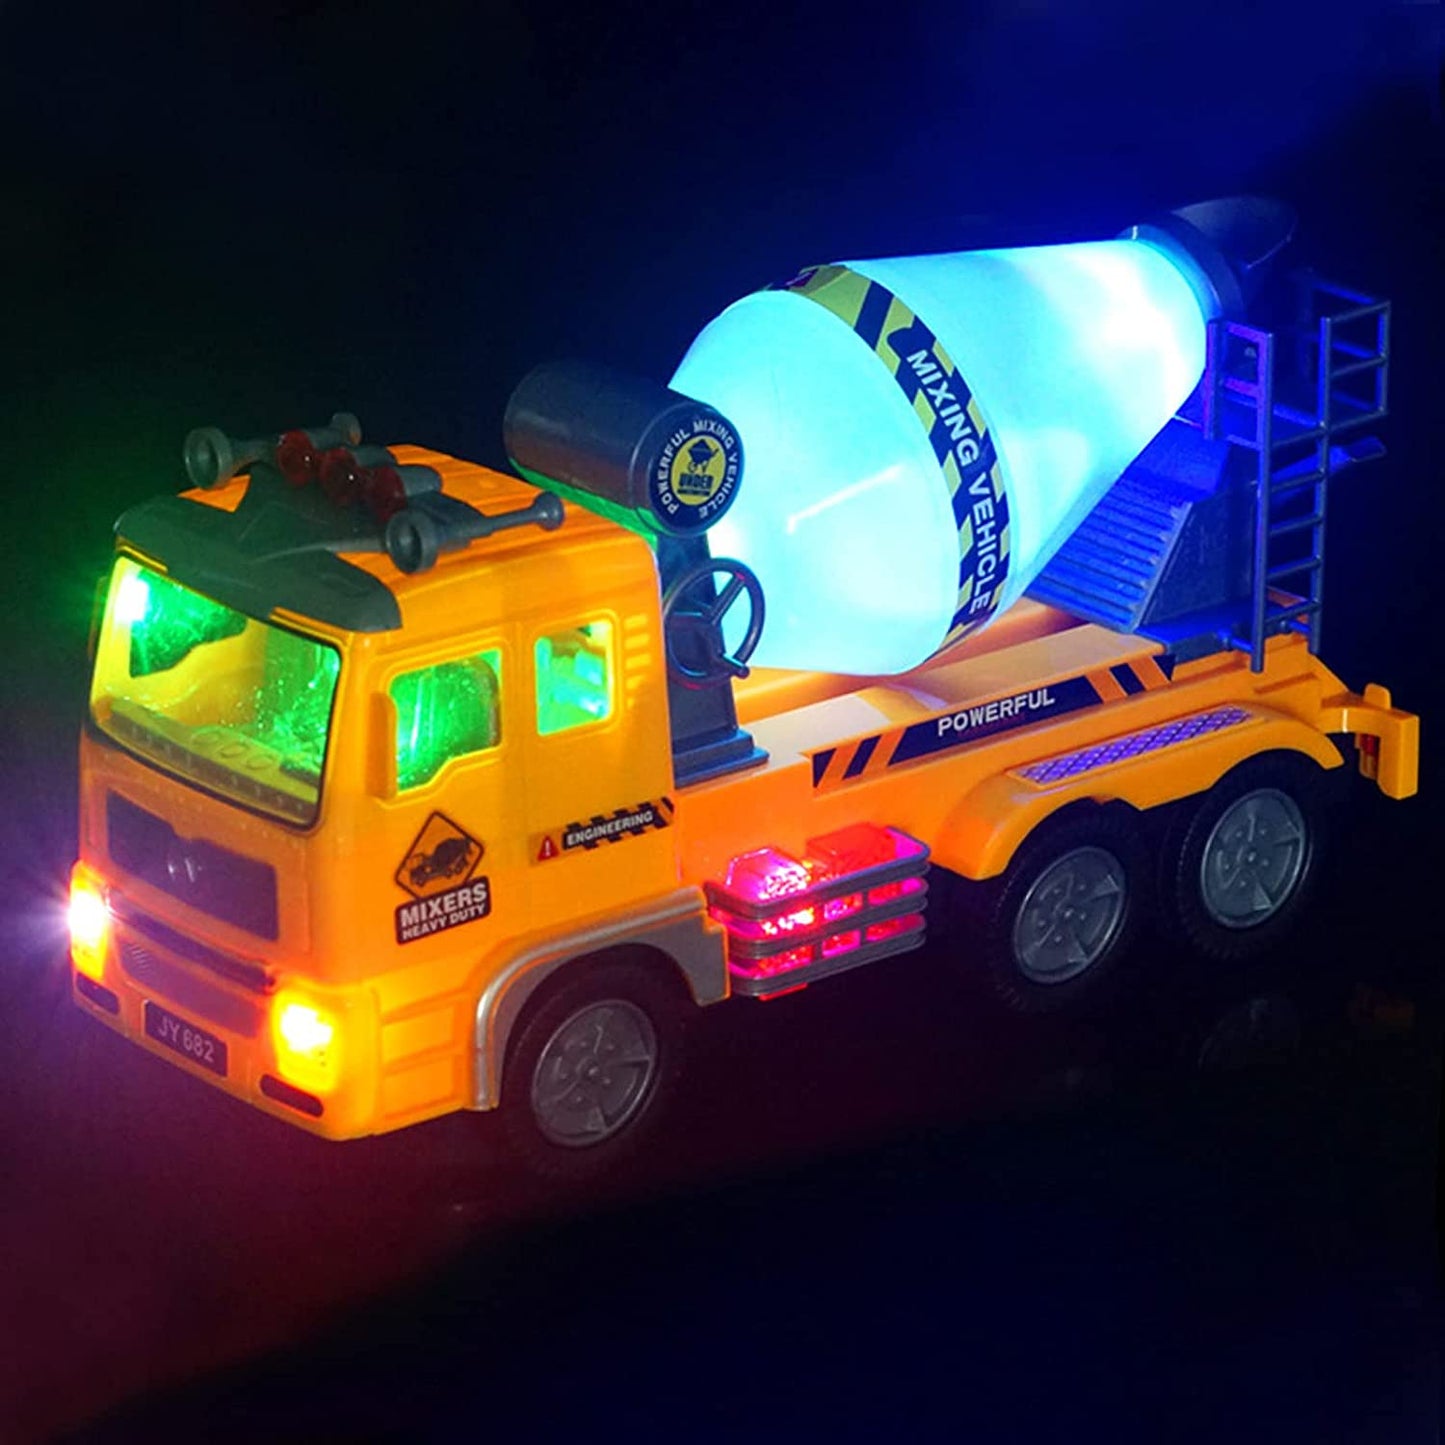 4D Lights up Trucks Toys for 3 4 5 6 Year Old Boys Girls,Toddler Toys Electric Fire Truck with Bright Flashing Lights and Sounds,Bump&Go Car Toy for Imaginative Play(Fire Truck)